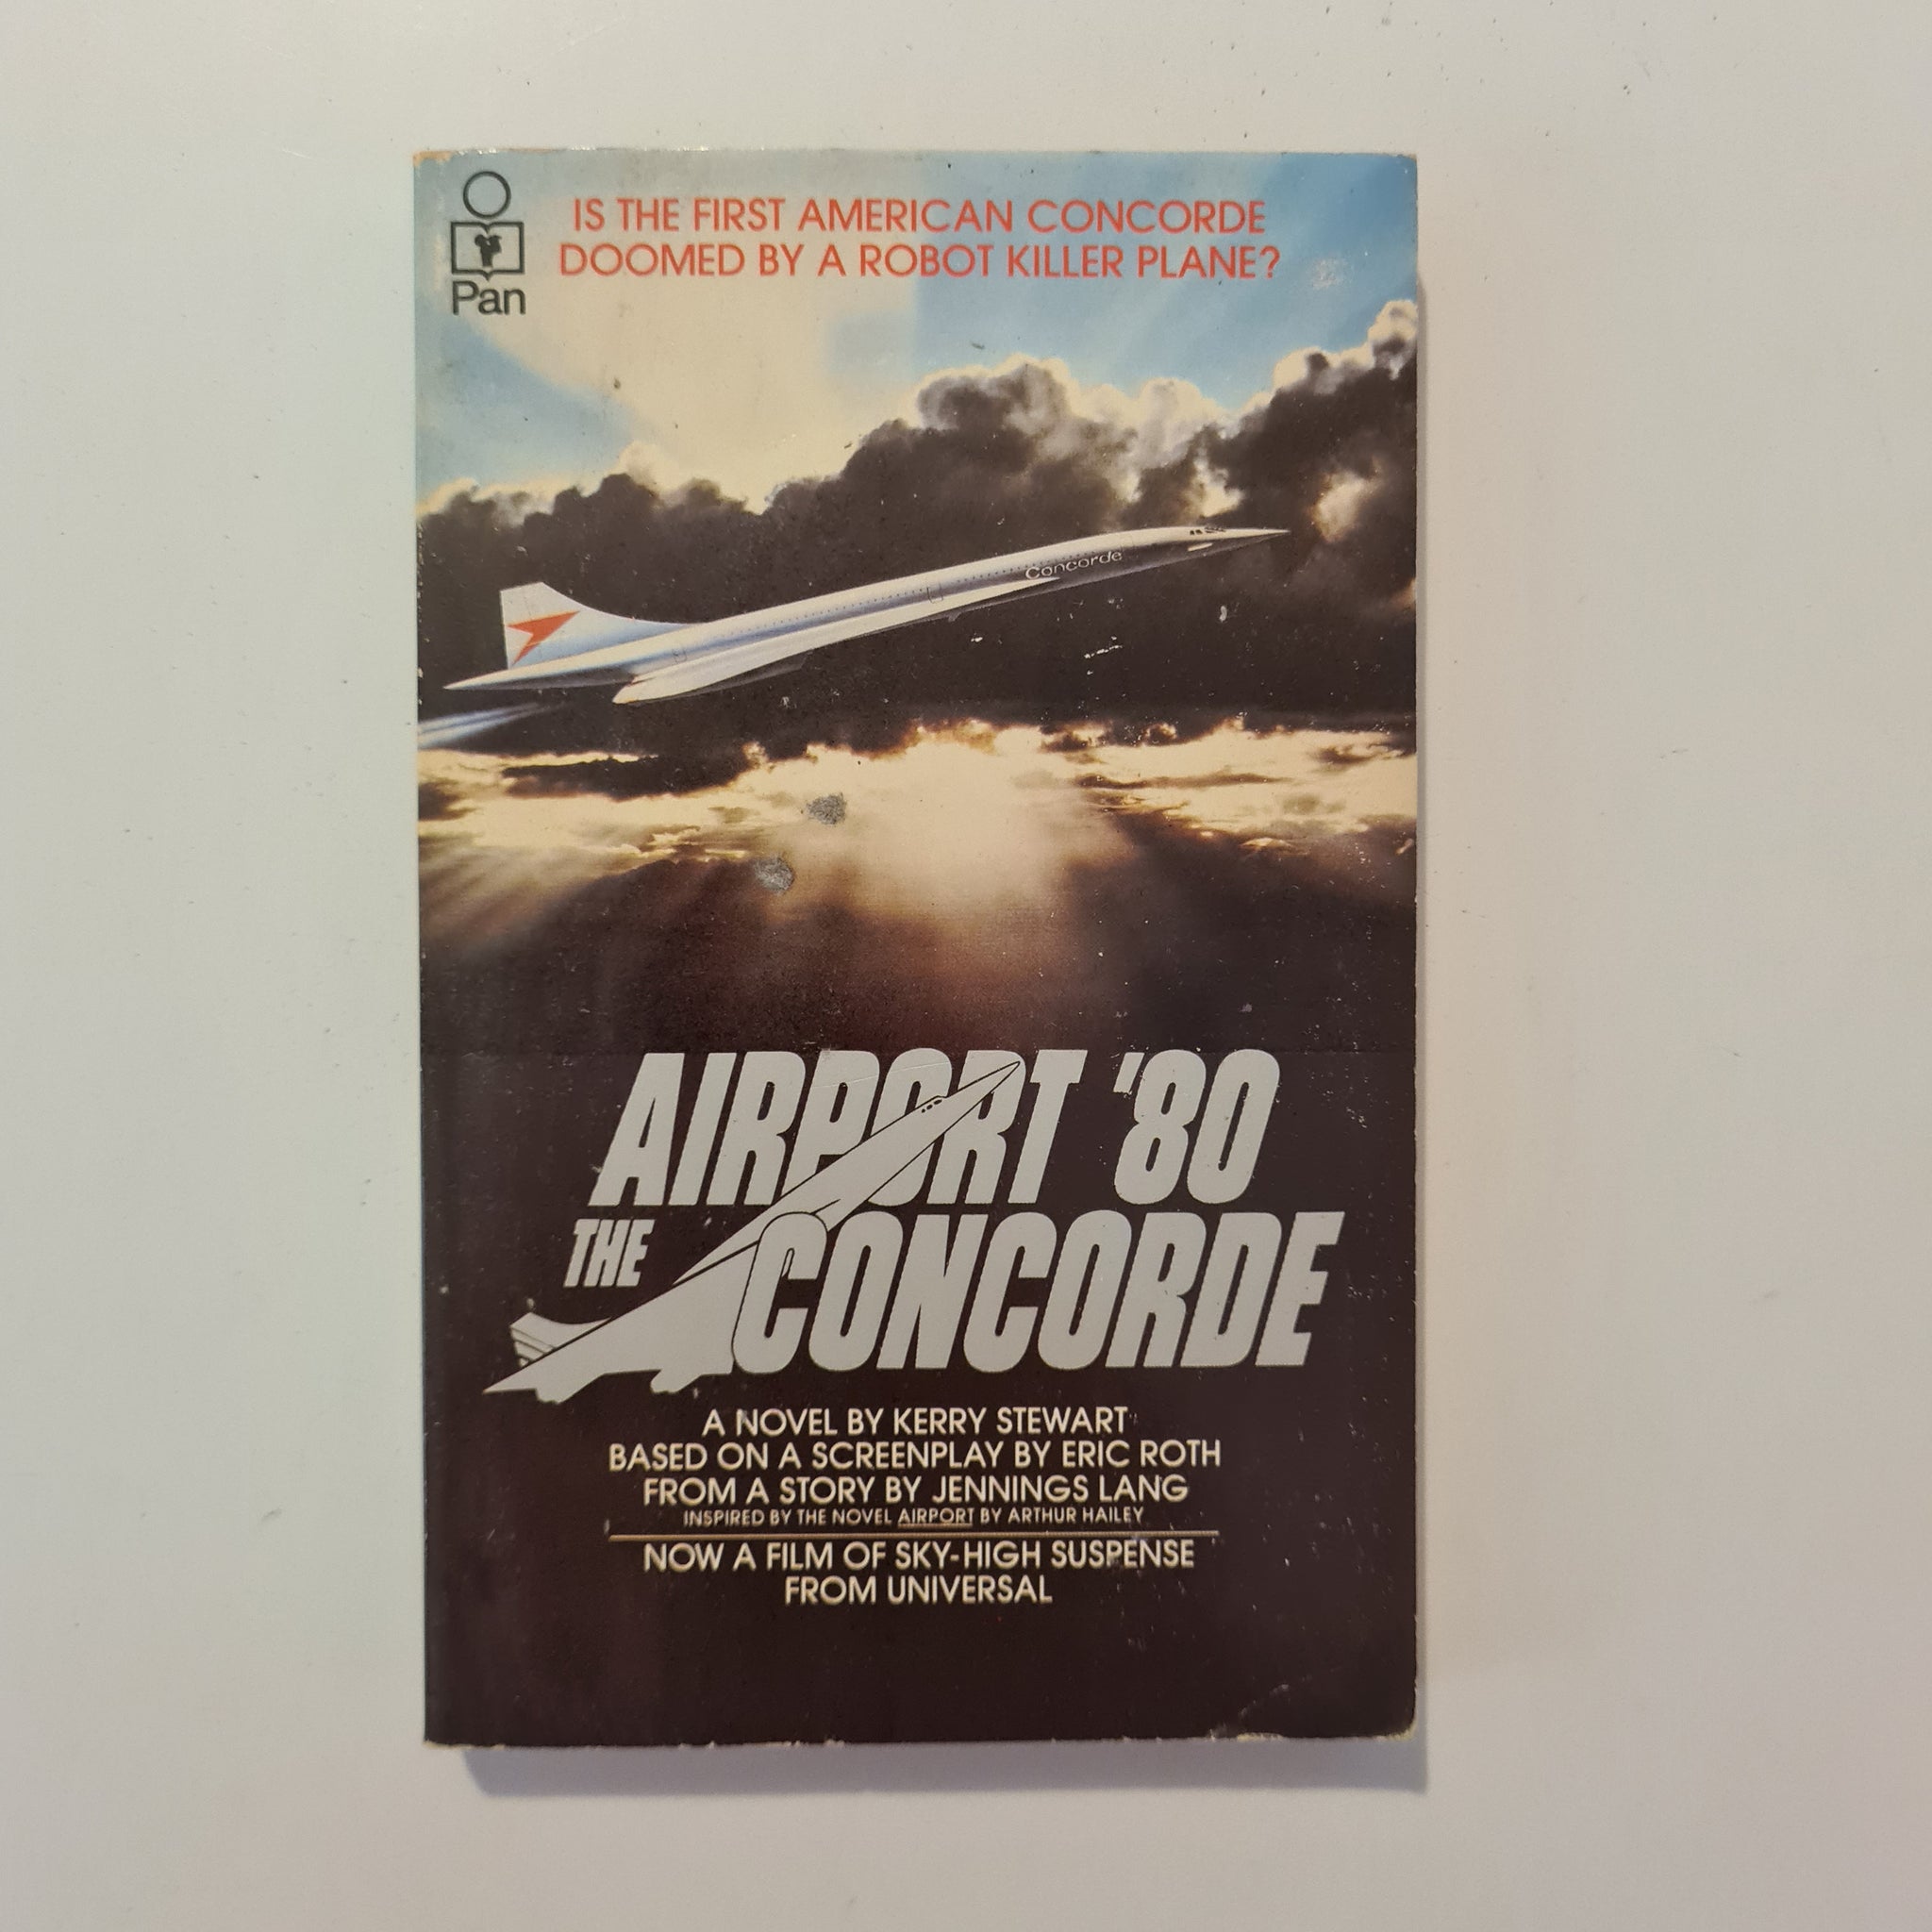 Airport '80-The Concorde